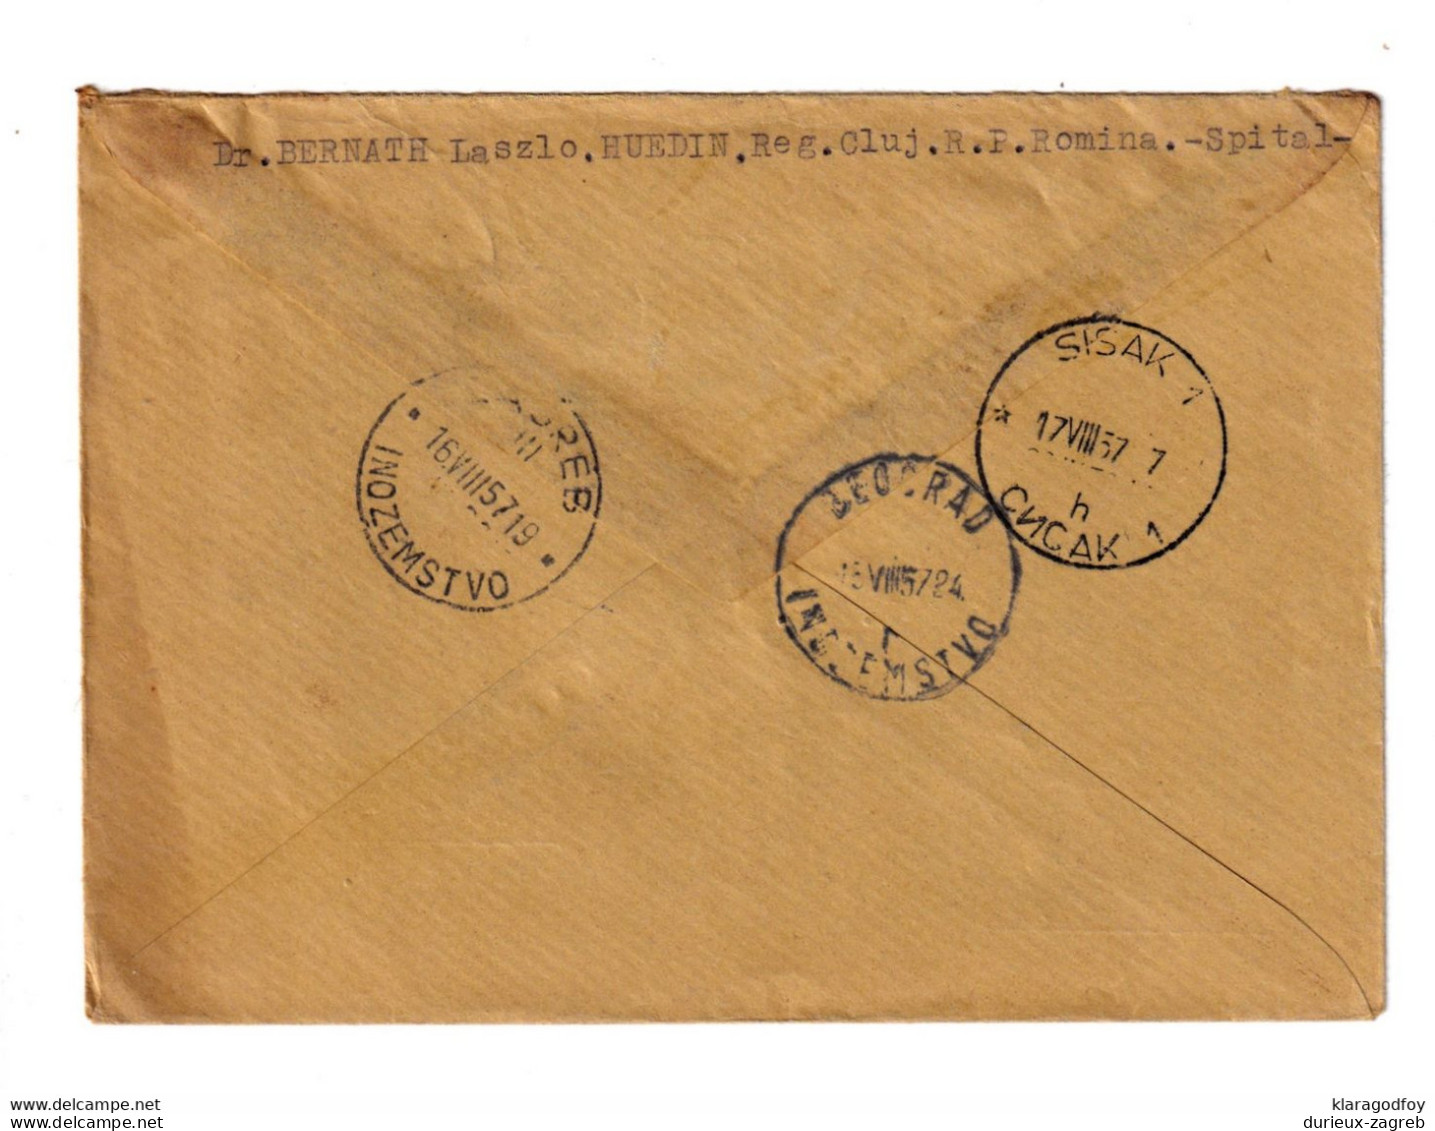 Romania Letter Cover Posted Registered 1957 Huedin To Sisak B201210 - Covers & Documents